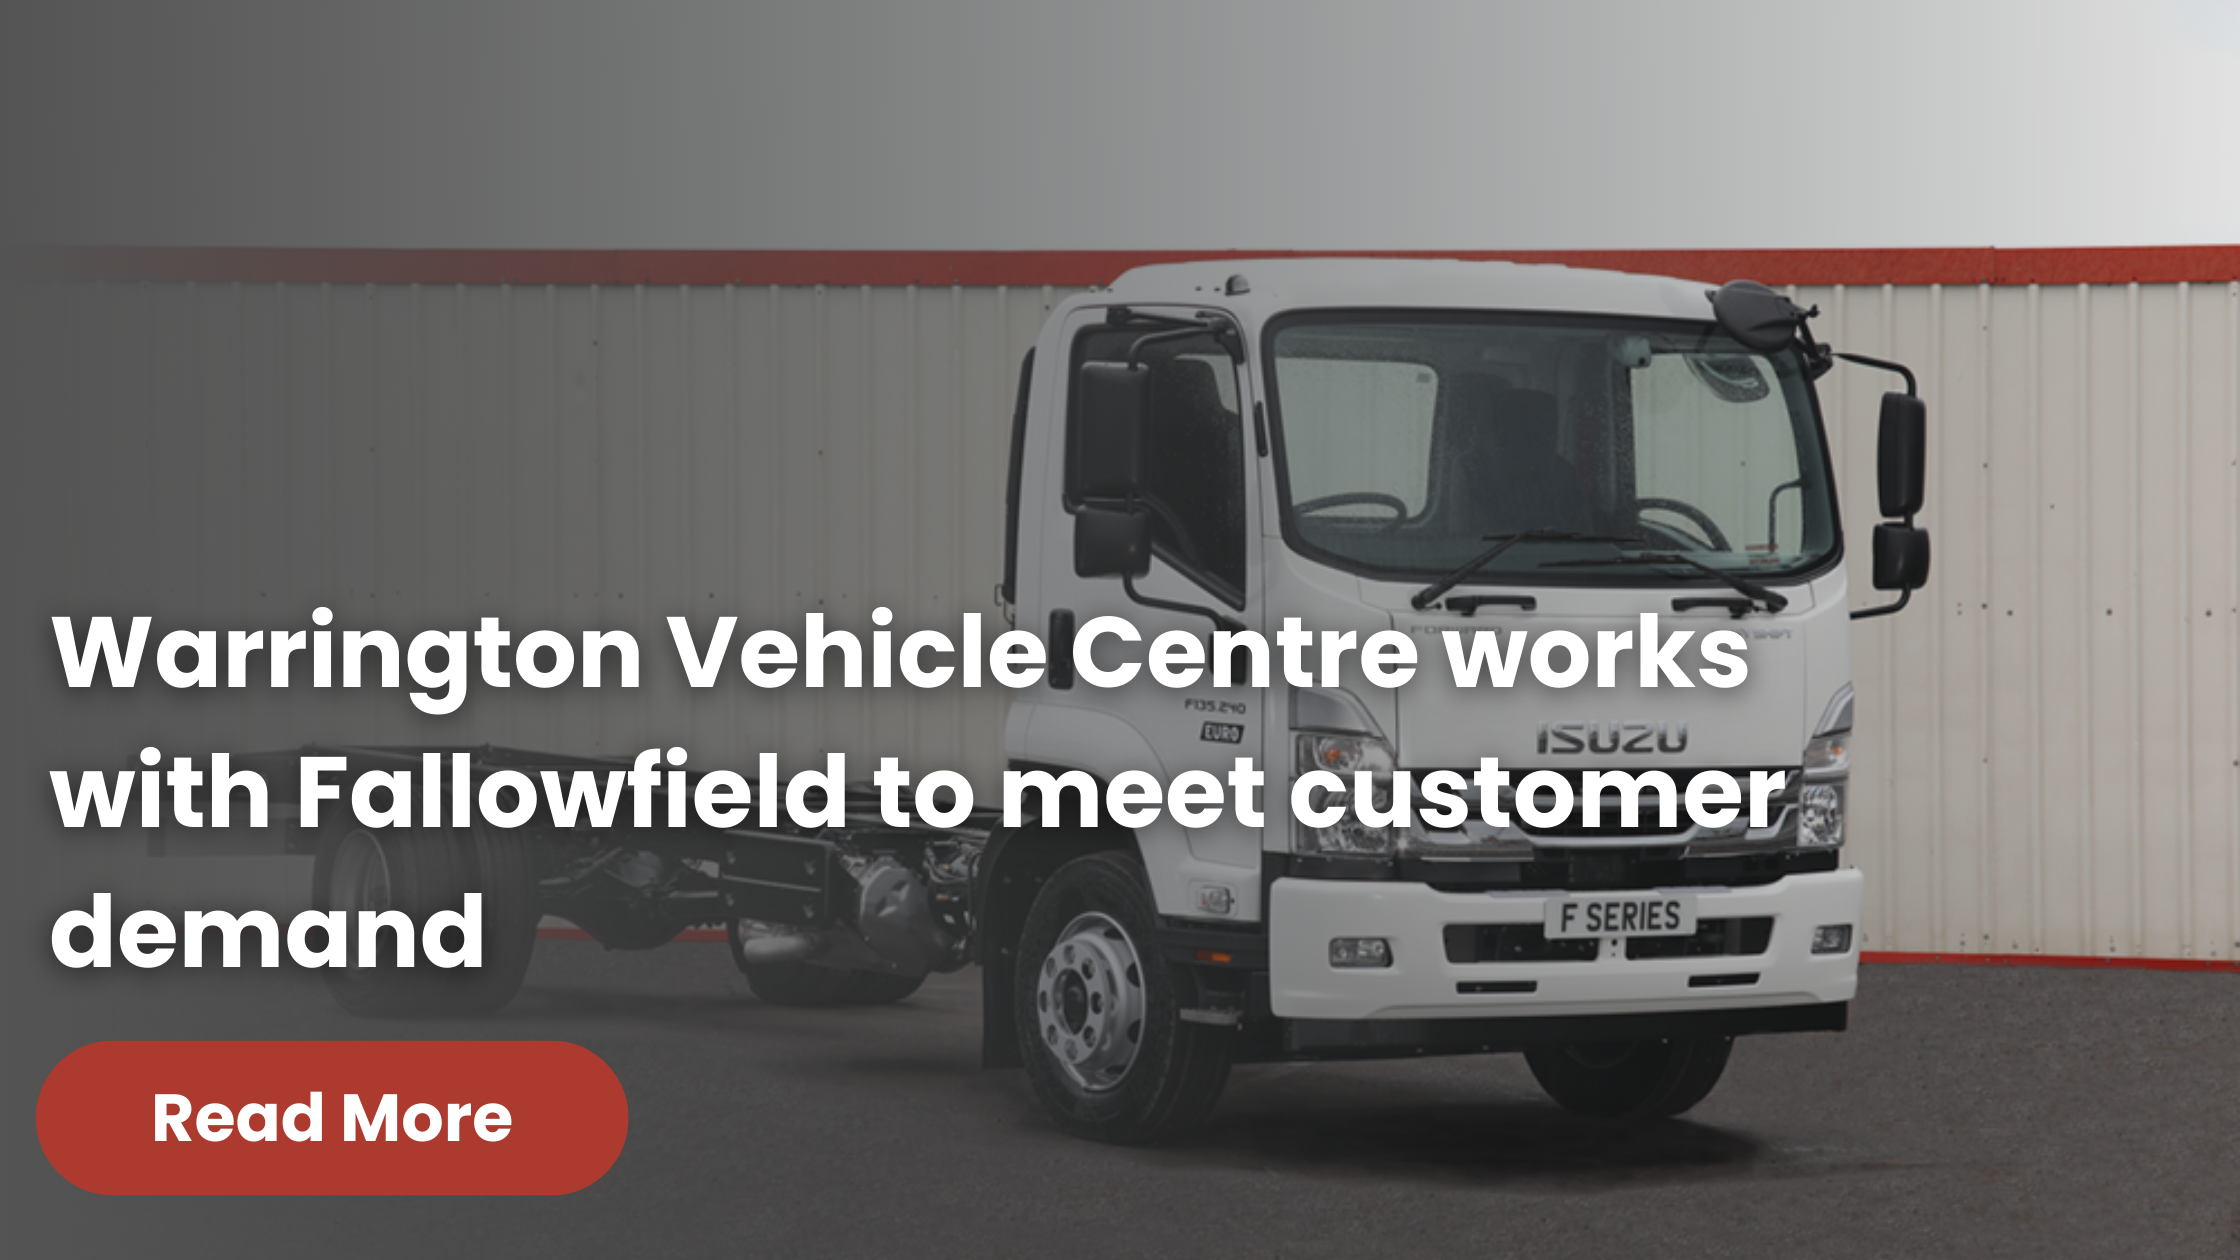 Warrington Vehicle Centre works with Fallowfield to meet customer demand